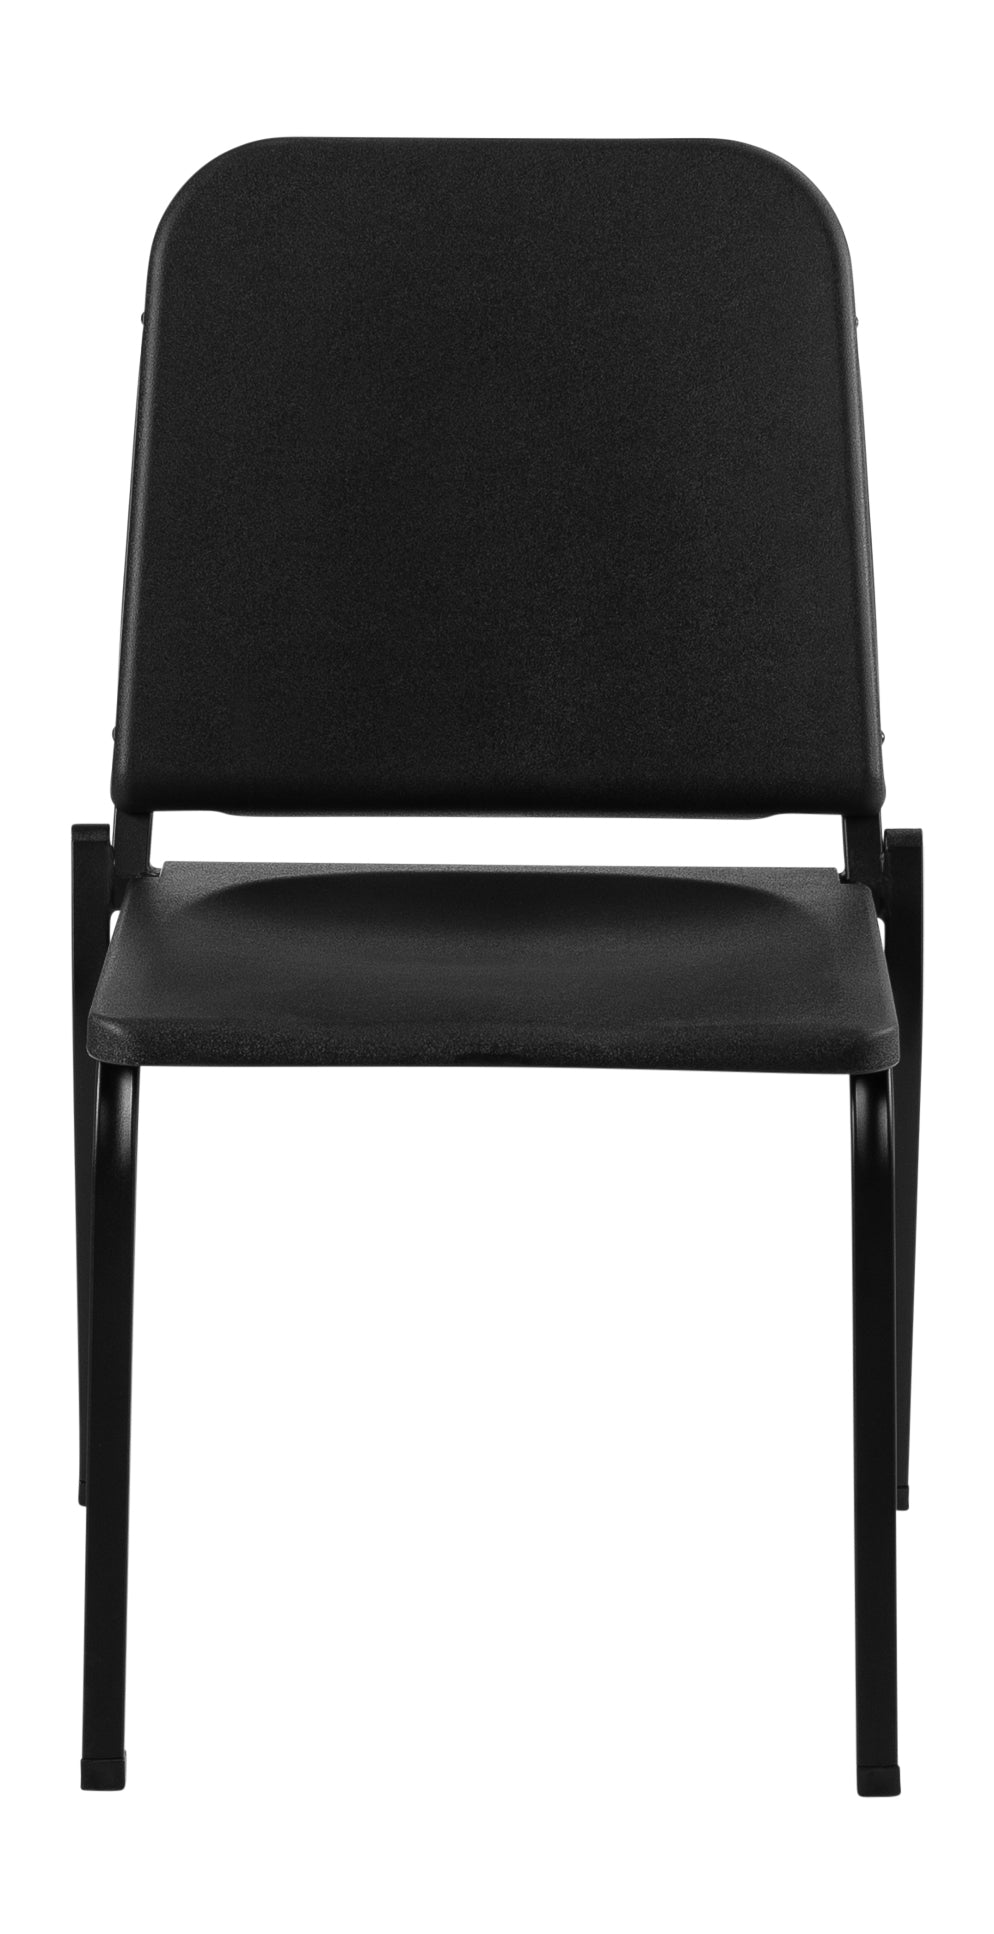 NPS 8200 Series Melody Music Chair, 16"H, Black (National Public Seating NPS-8210-16) - SchoolOutlet